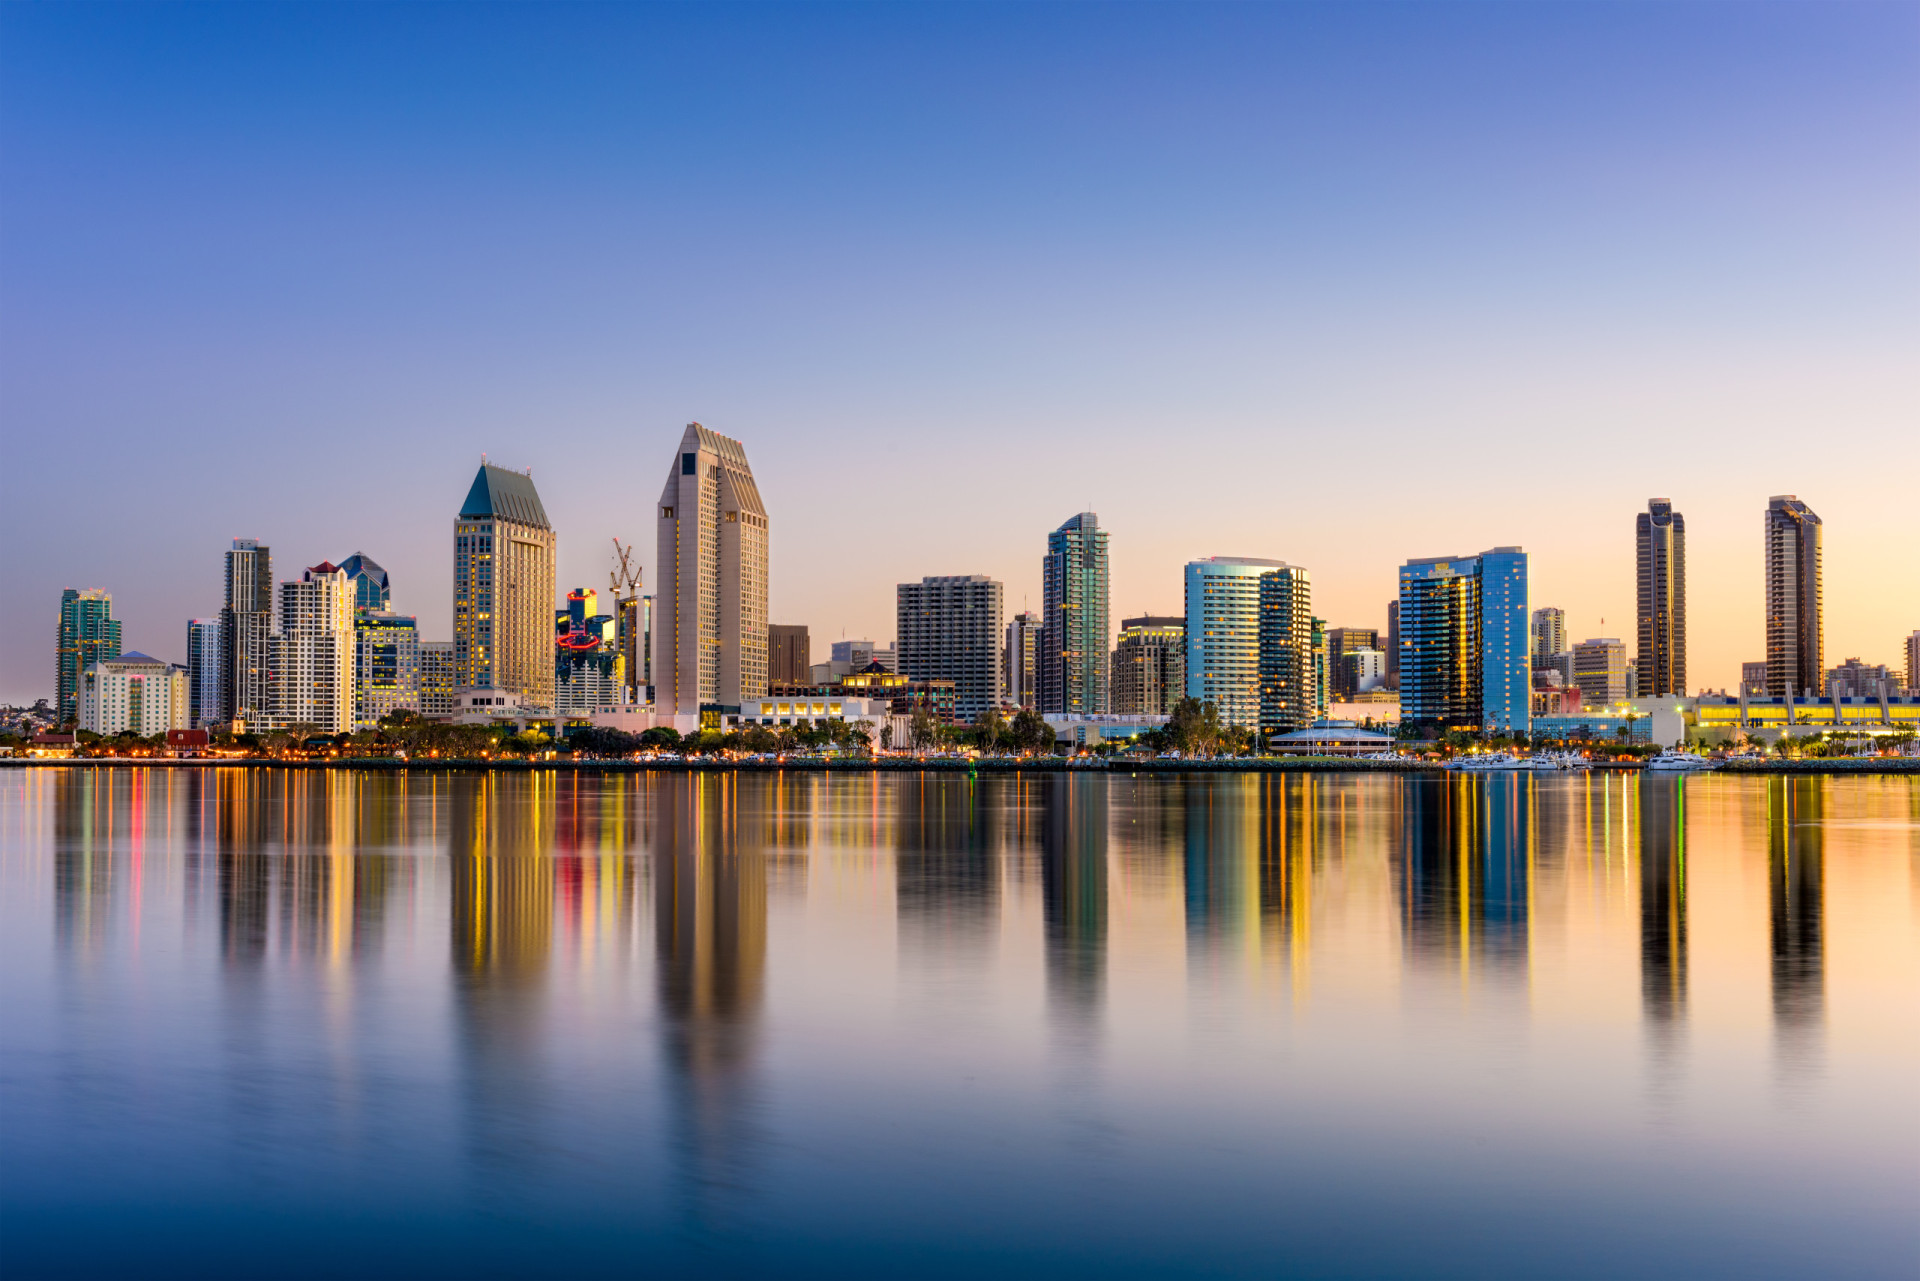 <p>With a rent index of 76.5, San Diego's appeal is multifaceted – a military stronghold, a tech hub, and a city rich in employment opportunities.</p><p>You may also like:<a href="https://www.starsinsider.com/n/318591?utm_source=msn.com&utm_medium=display&utm_campaign=referral_description&utm_content=651794en-in"> Beat it! The best drummers in the world</a></p>